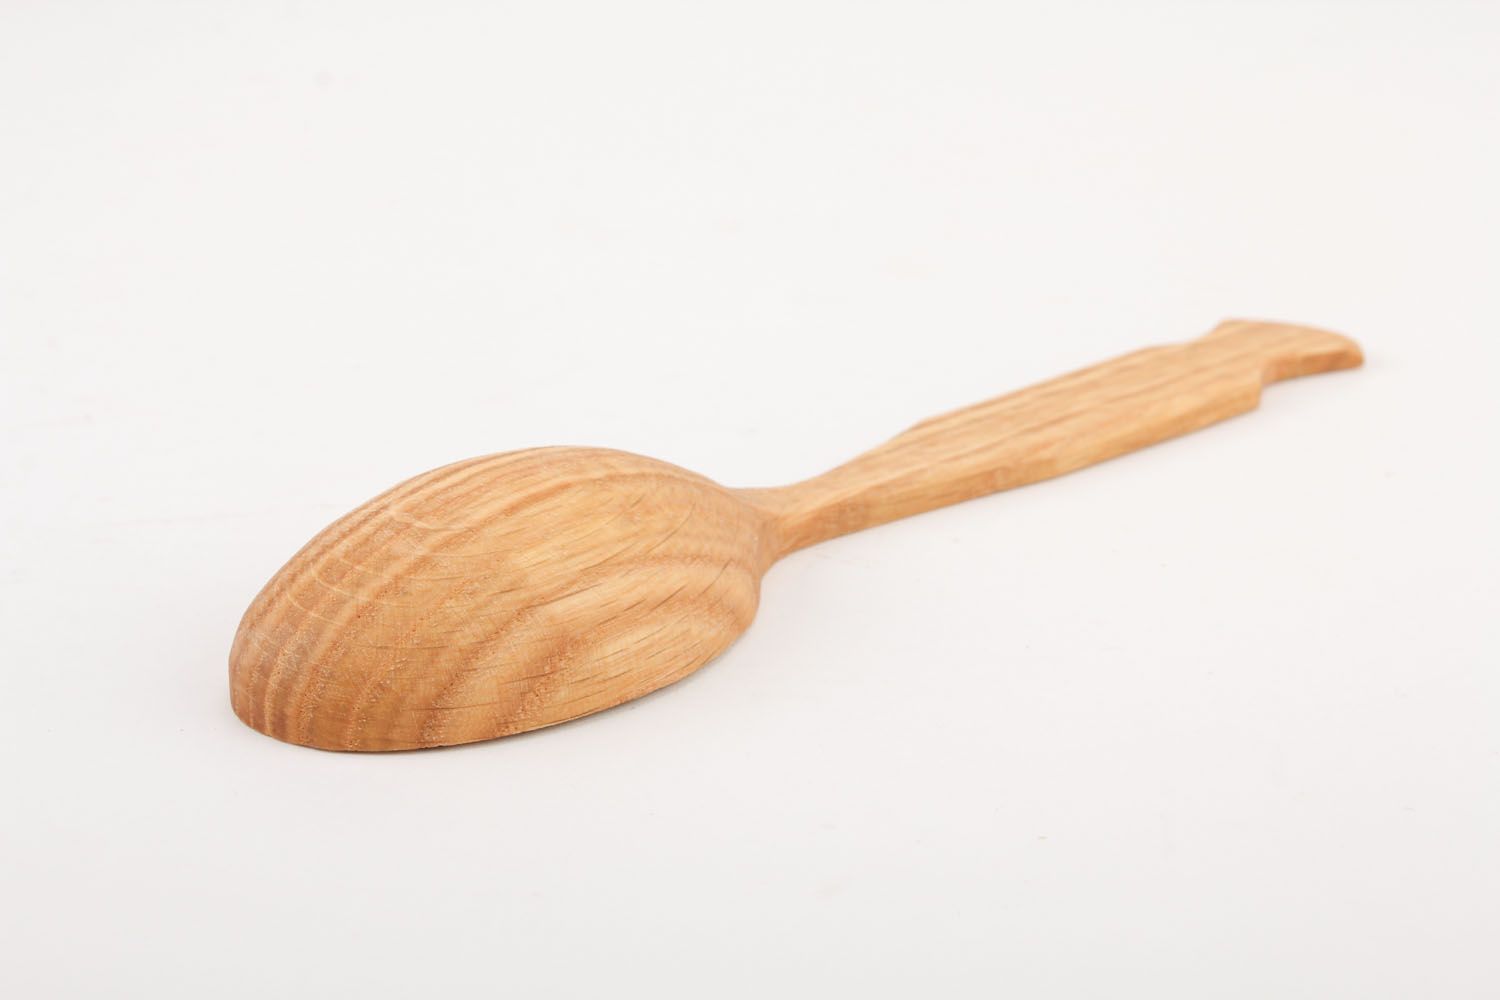 Homemade wooden spoon photo 1